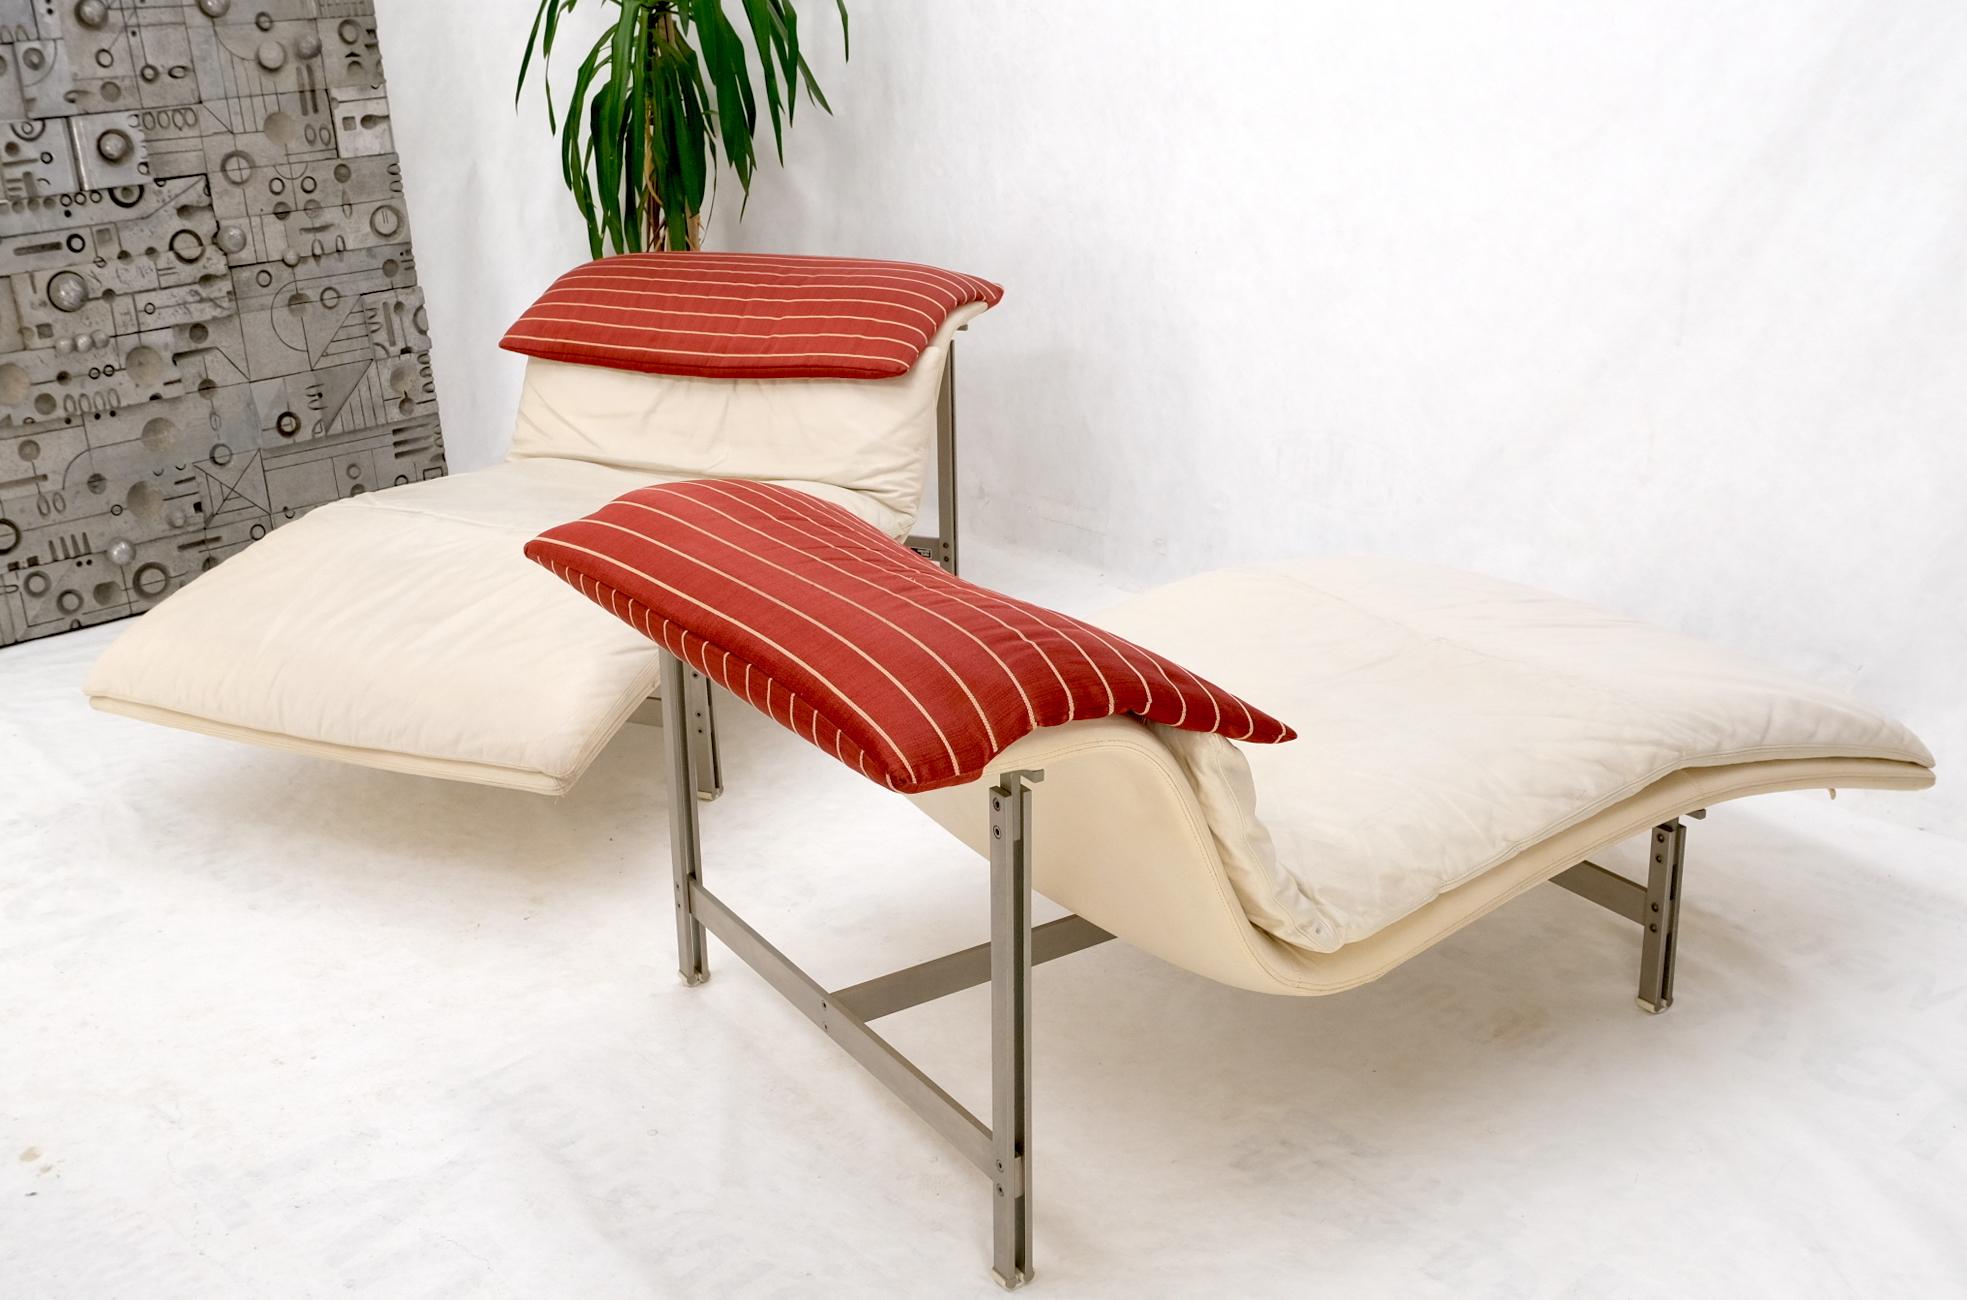 Pair of Sapority Italian Mid Century Modern Leather Chaise Lounges For Sale 8